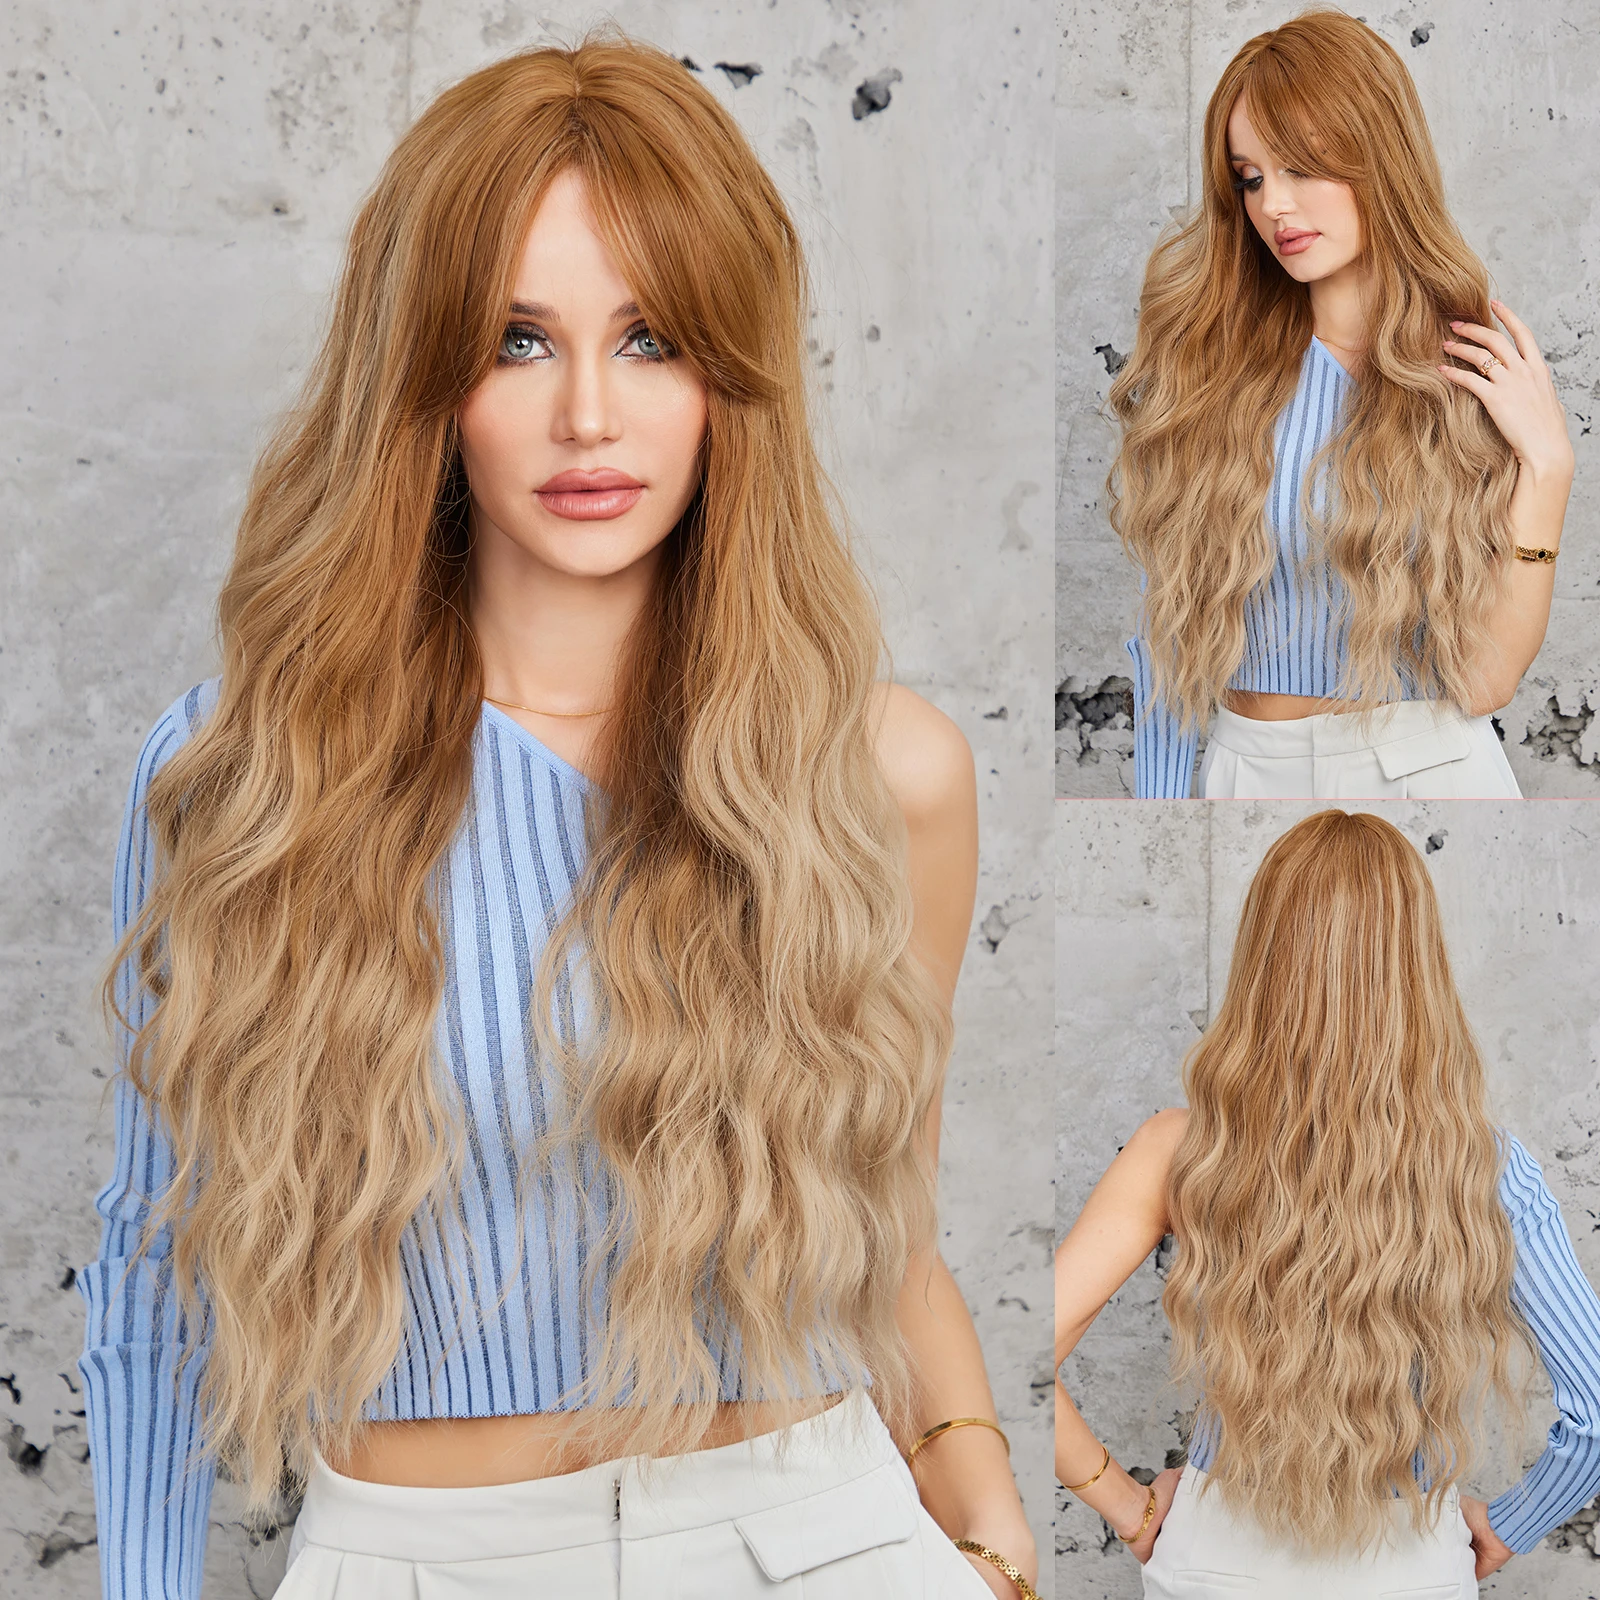 Long Wavy Daily Wigs with Bangs Ombre Blonde Natural Looking Synthetic Wigs for Women Party Use Soft Hair High Temperature Fiber